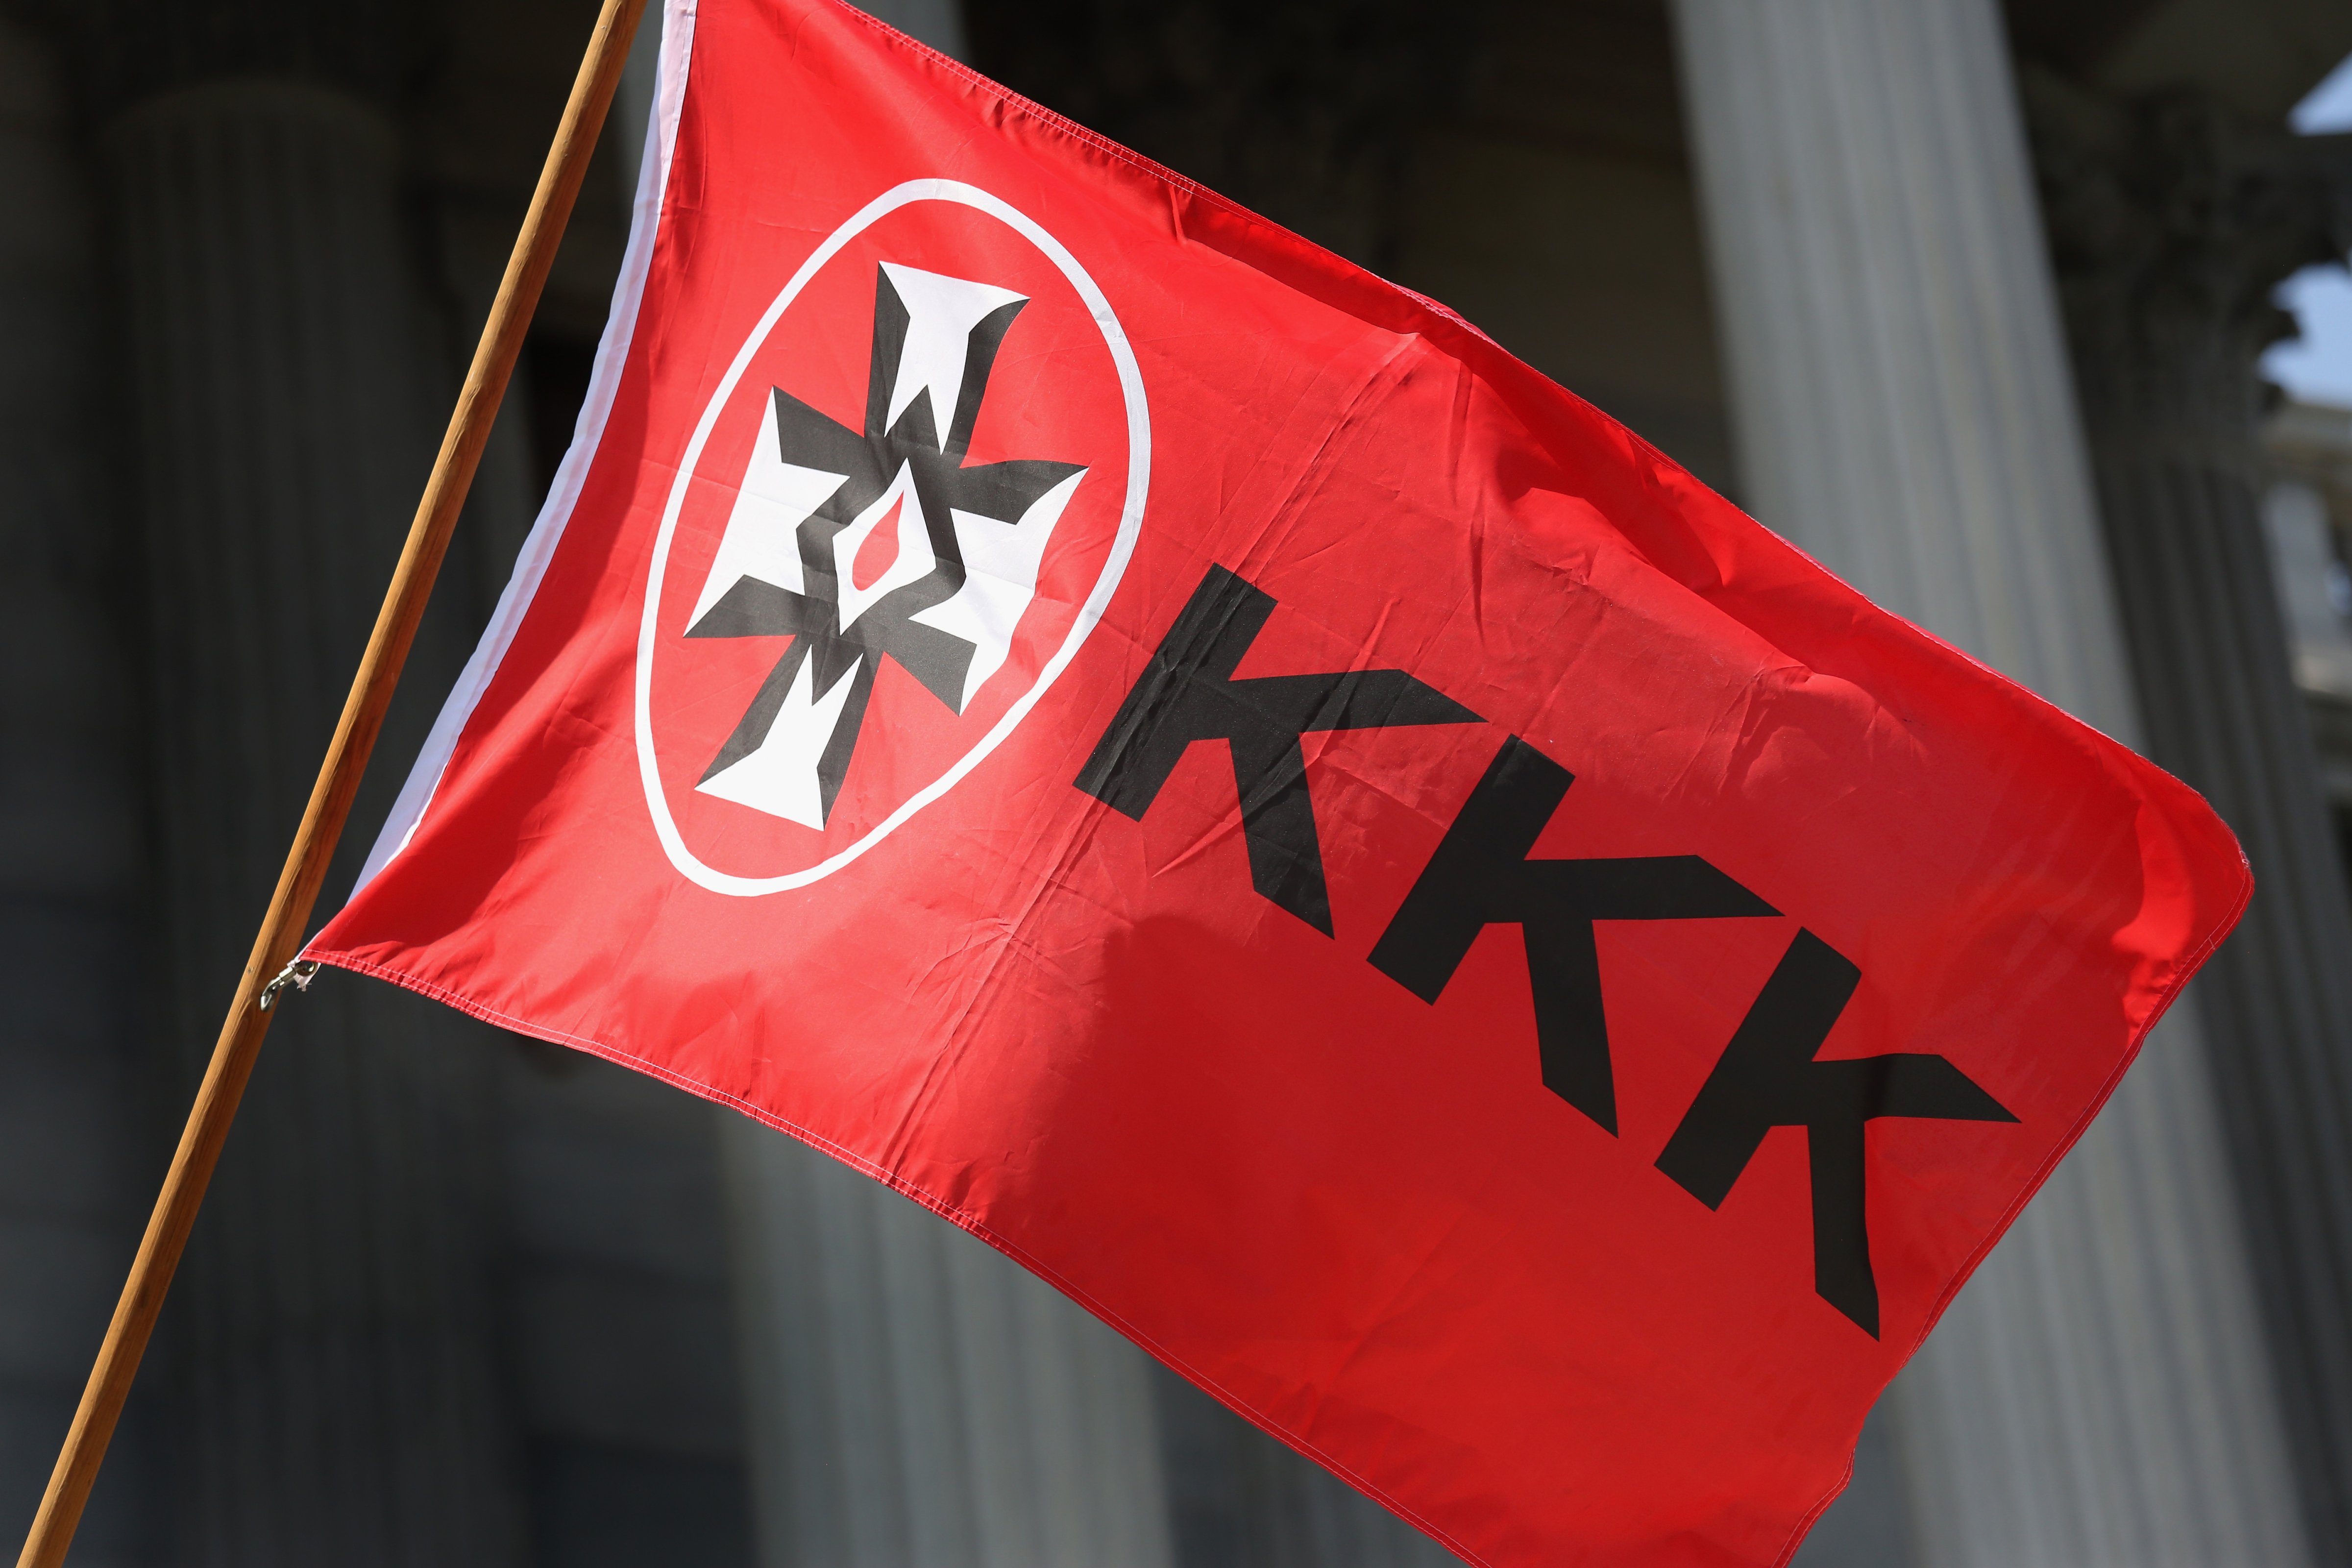 A Ku Klux Klan flag flies during a demonstration at the state house building on July 18, 2015 in Columbia, S.C. (John Moore—Getty Images)